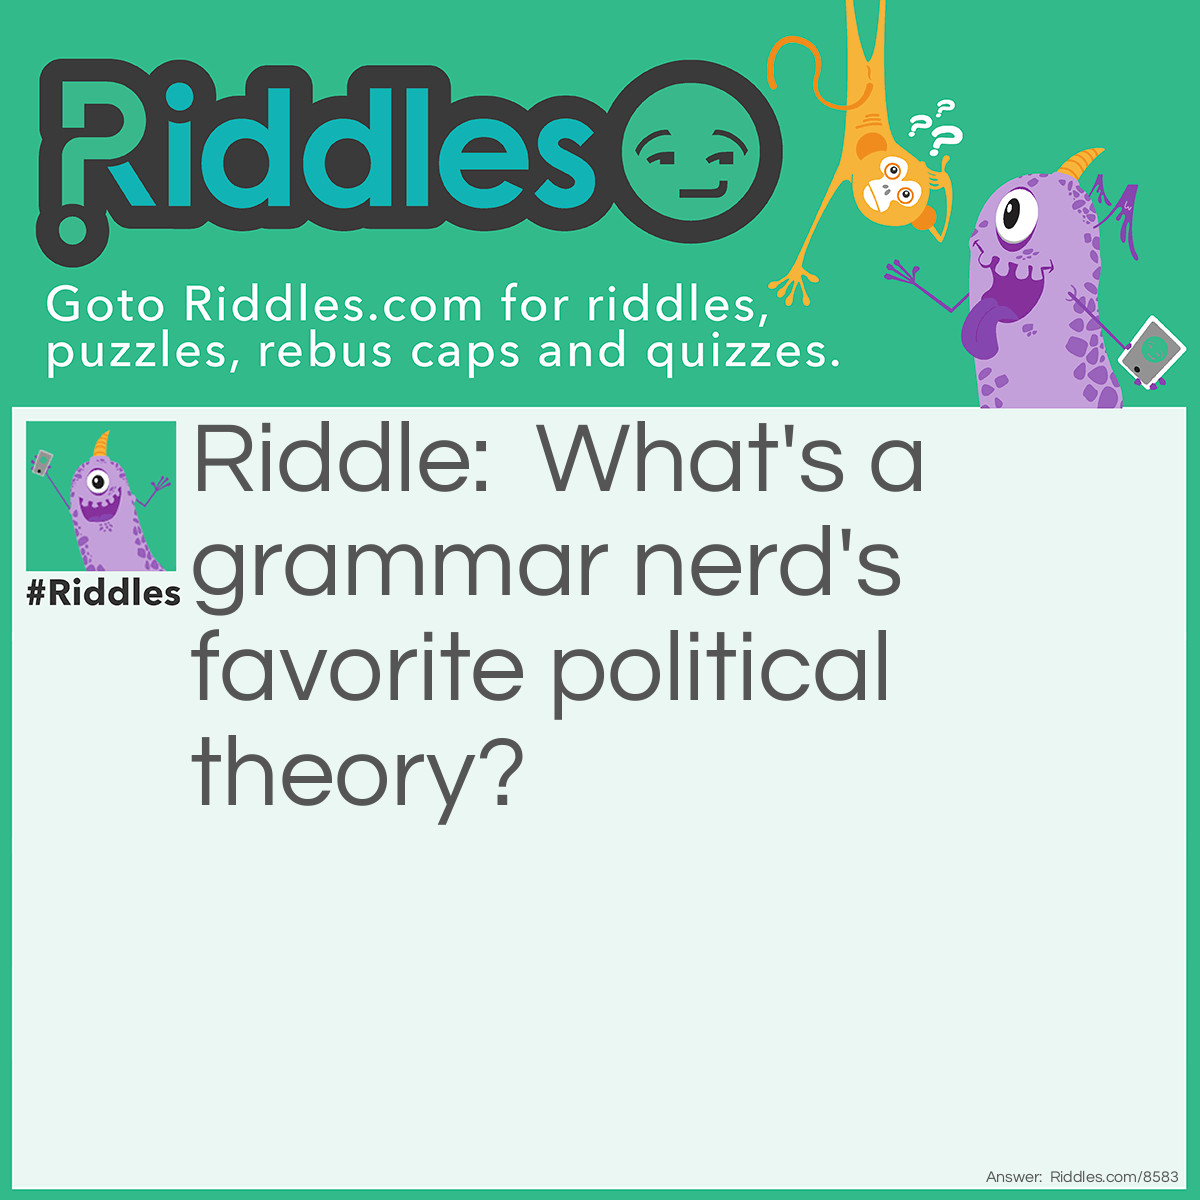 Riddle: What's a grammar nerd's favorite political theory? Answer: Comma-unism